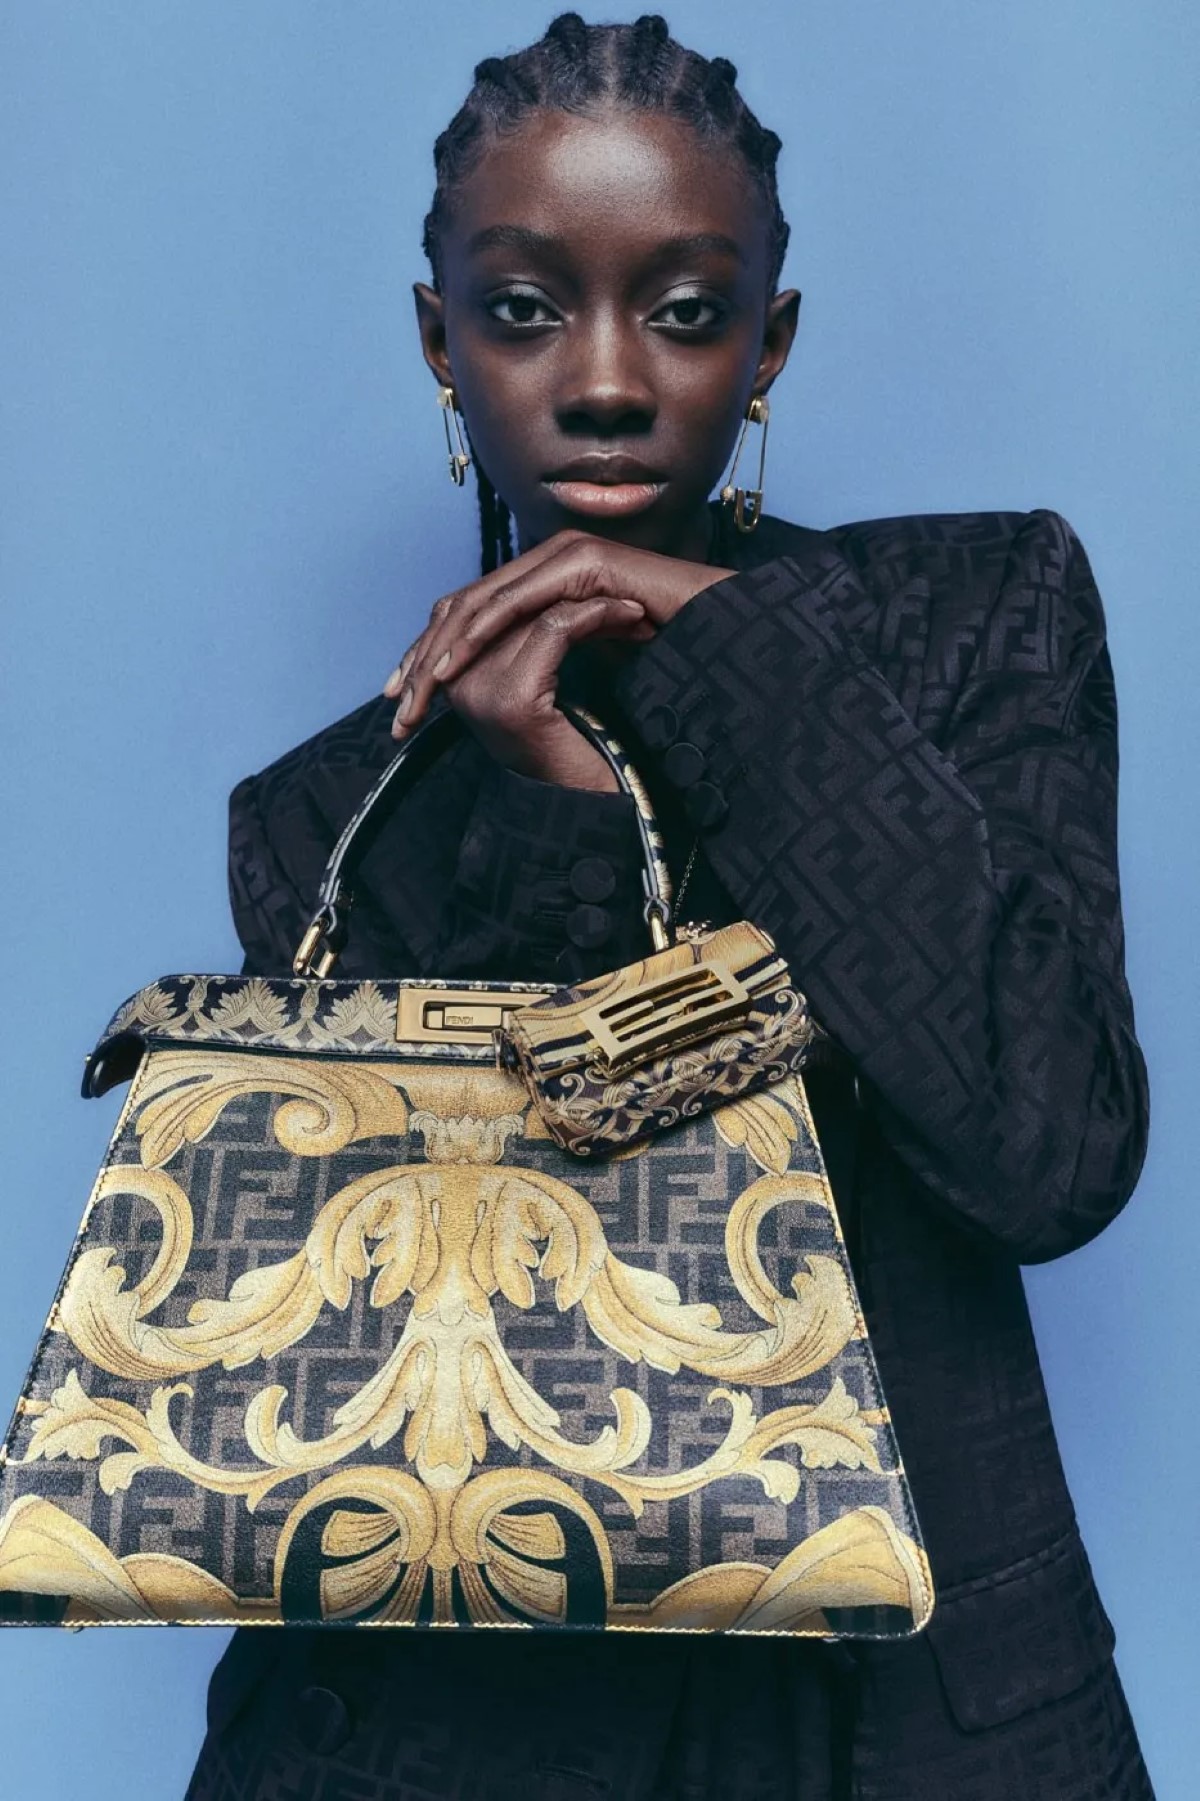 Fendi and Versace have officially released ‘’Fendace’’ collection